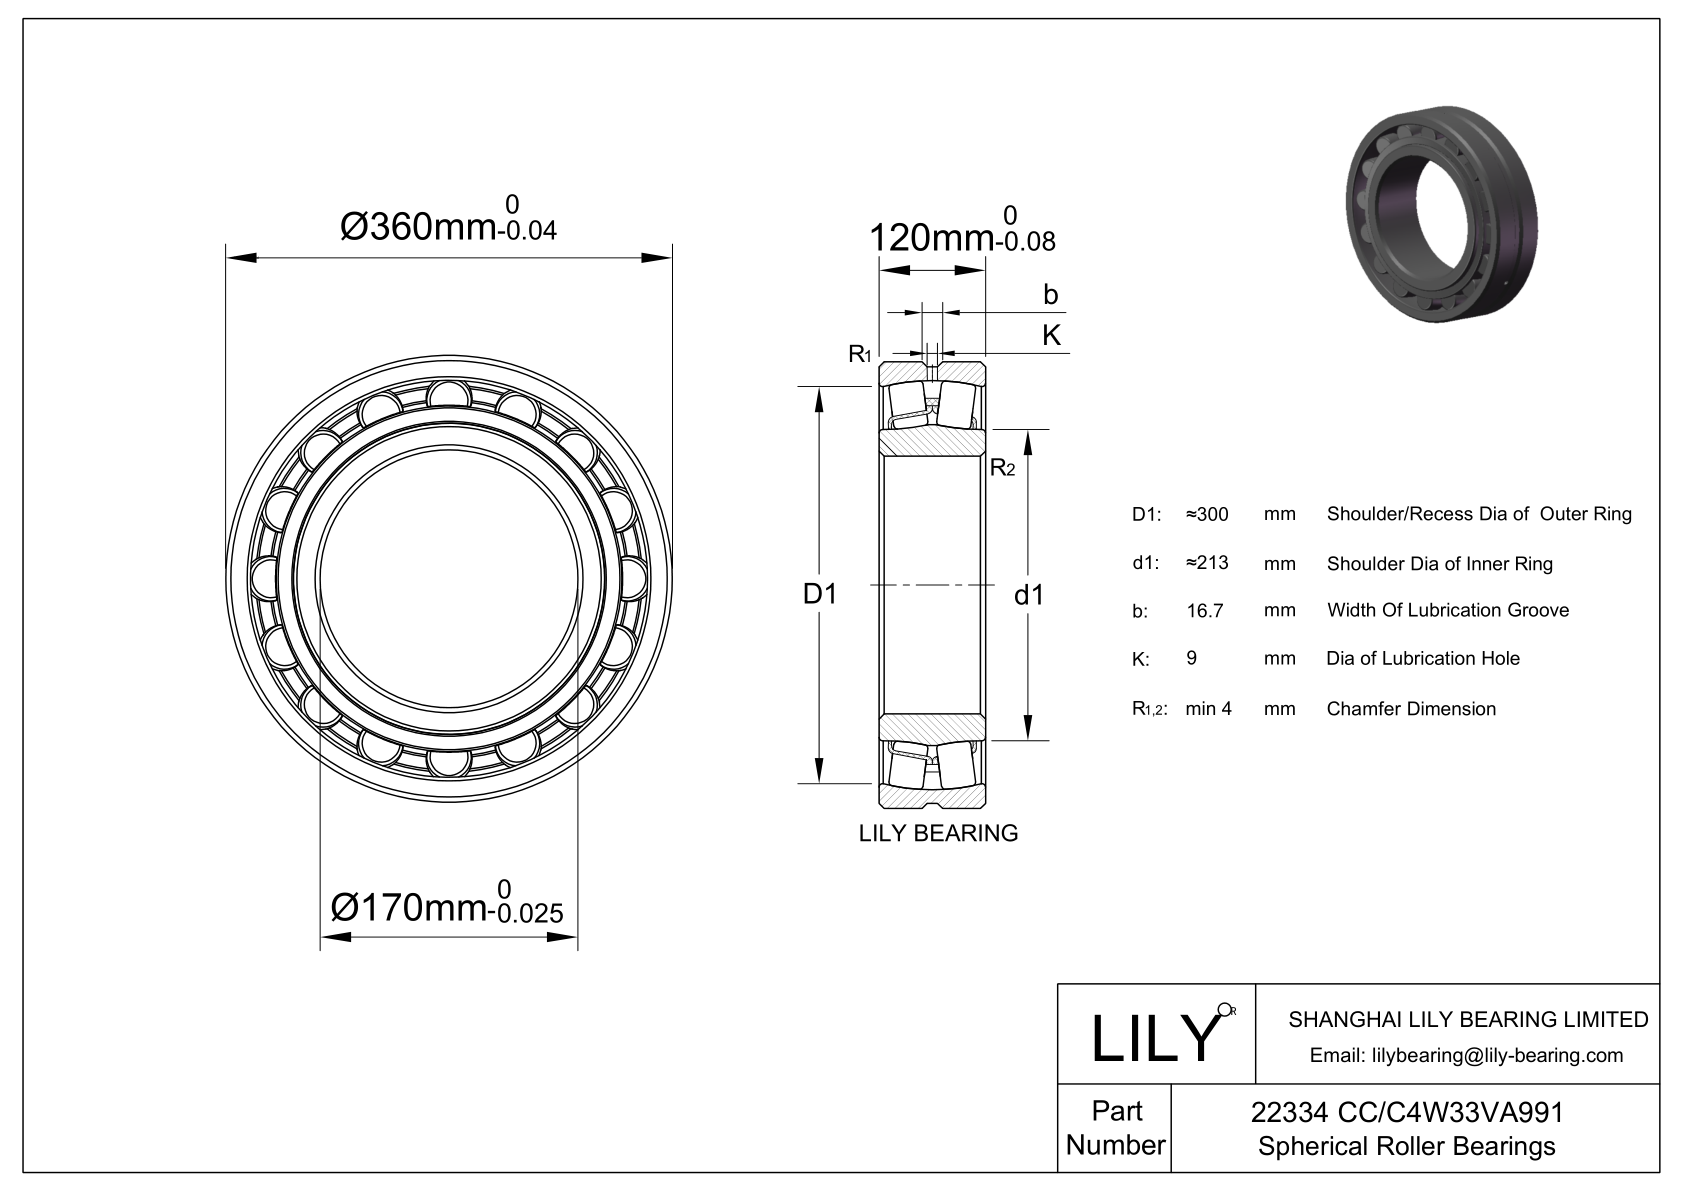 22334 CC/C4W33VA991 Double Row Spherical Roller Bearing cad drawing